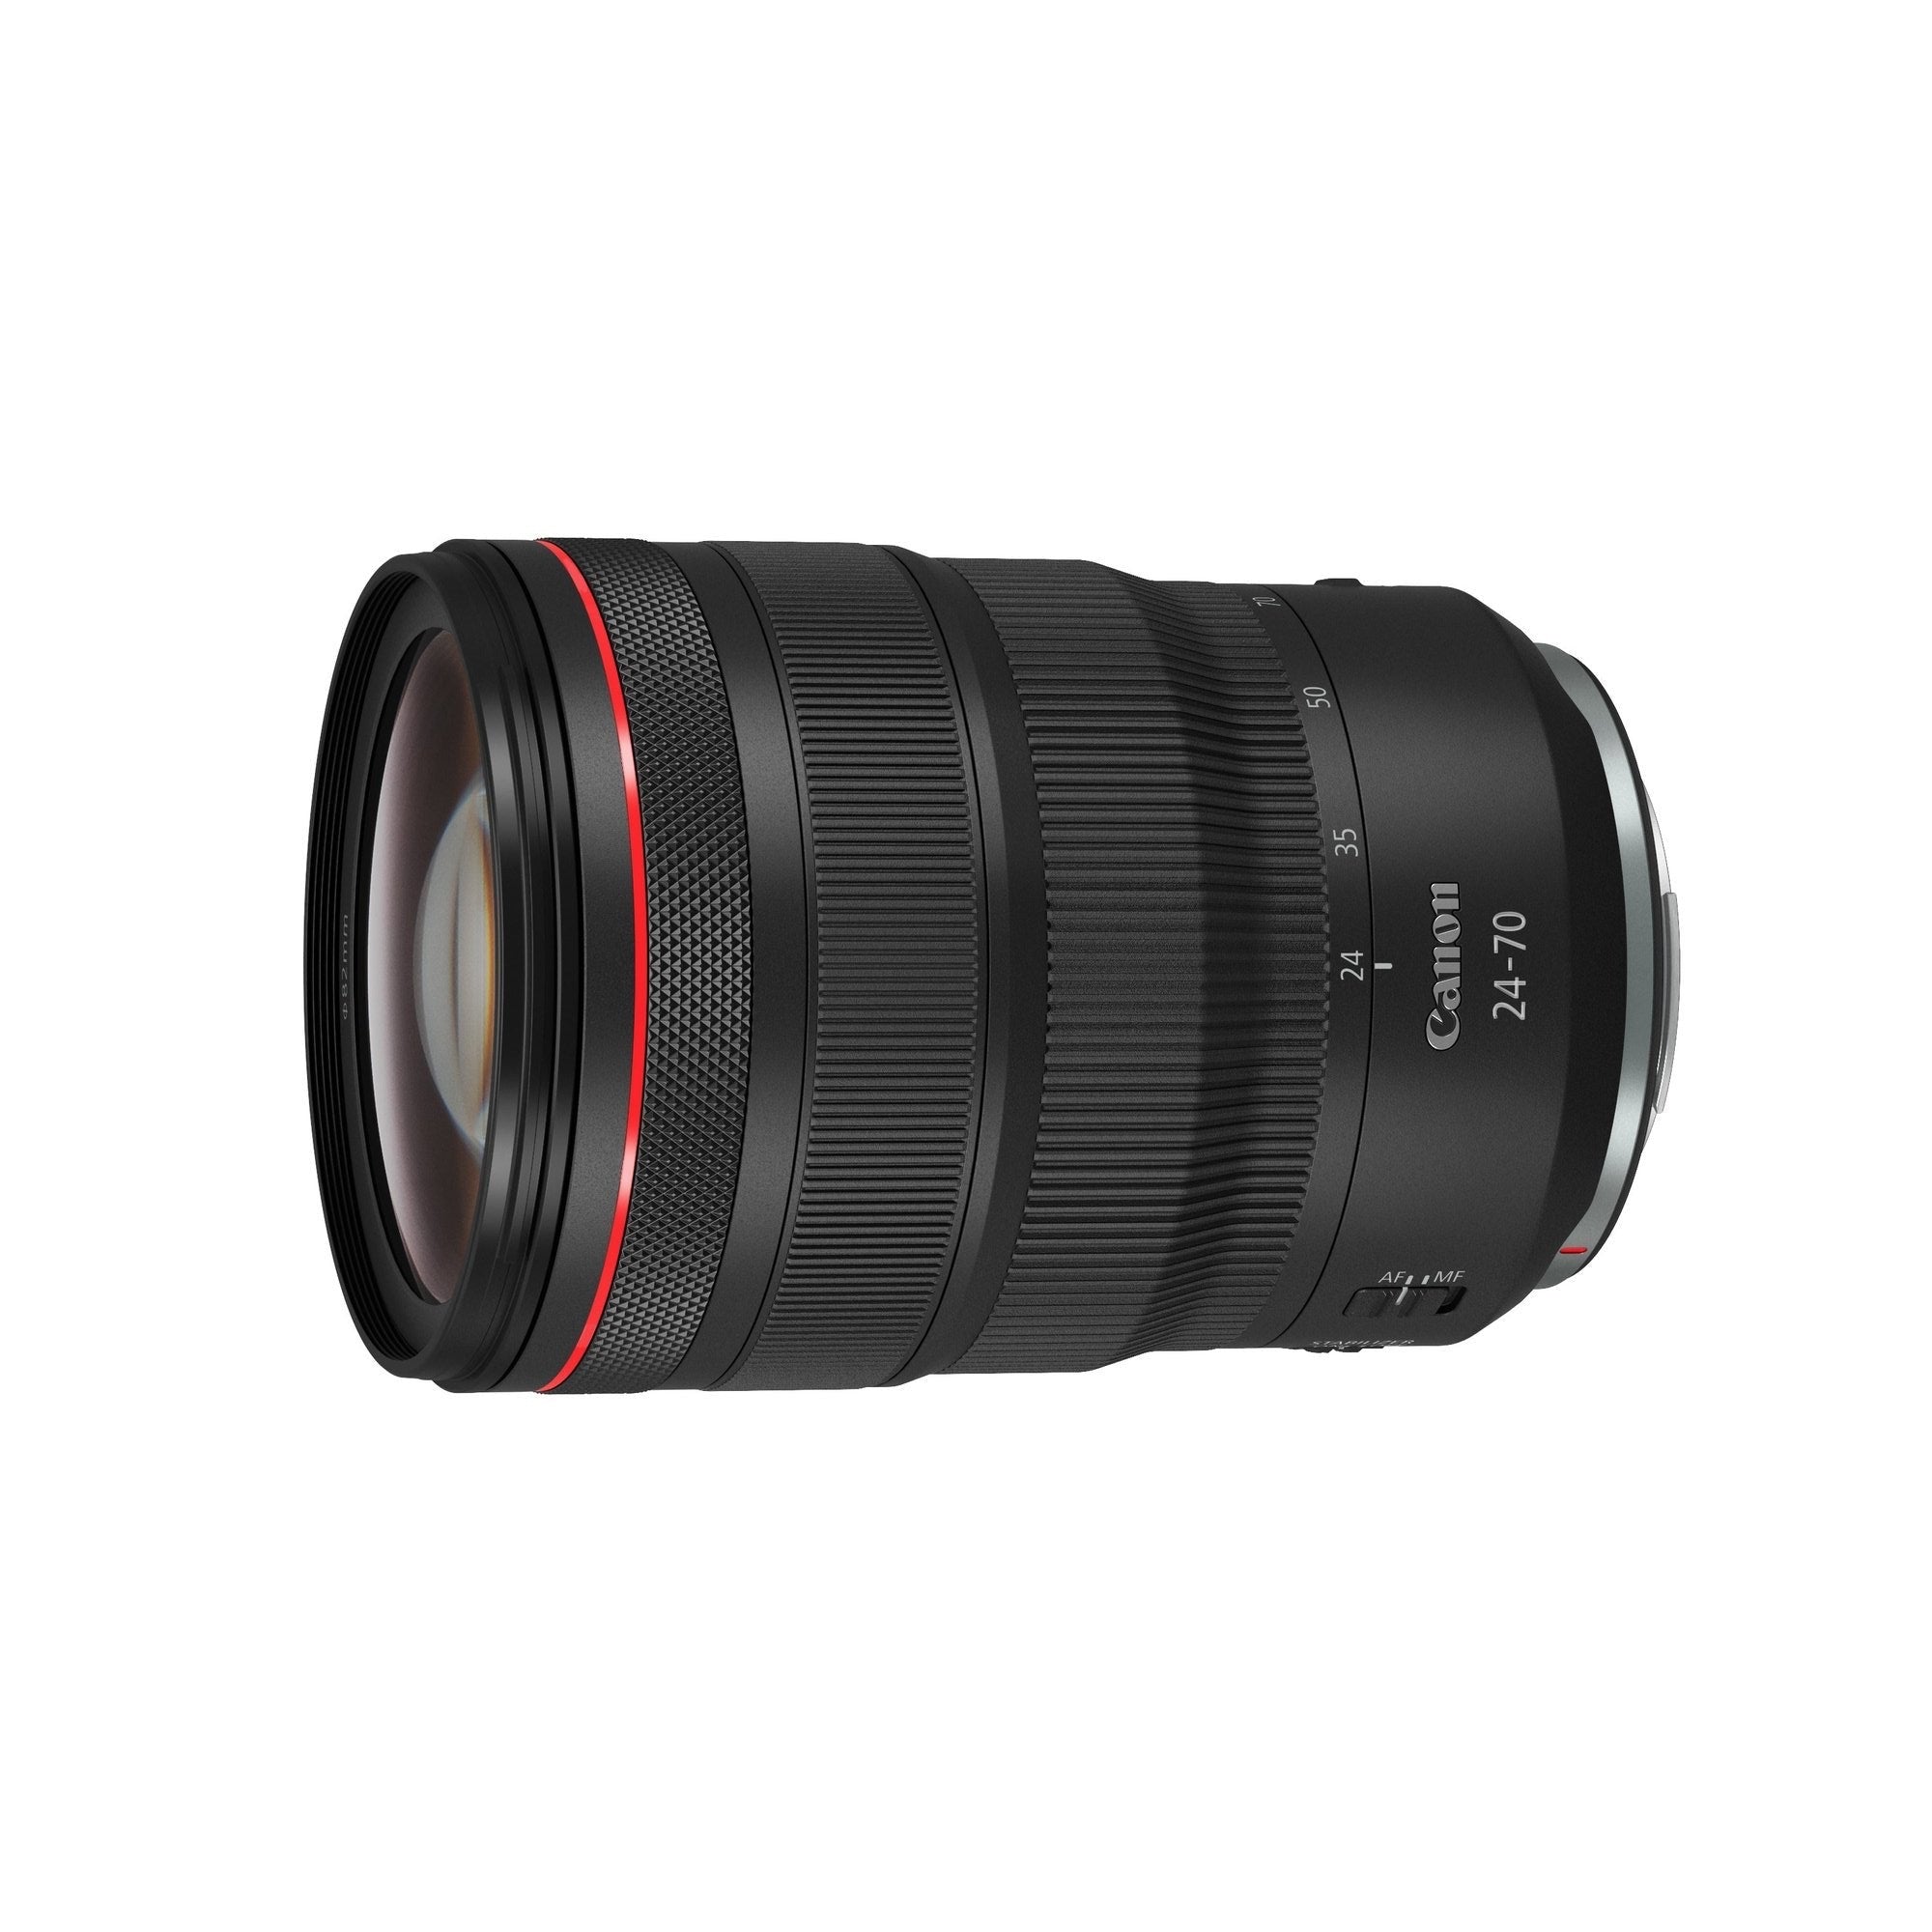 Canon RF 24-70mm f/2.8L IS USM Lens